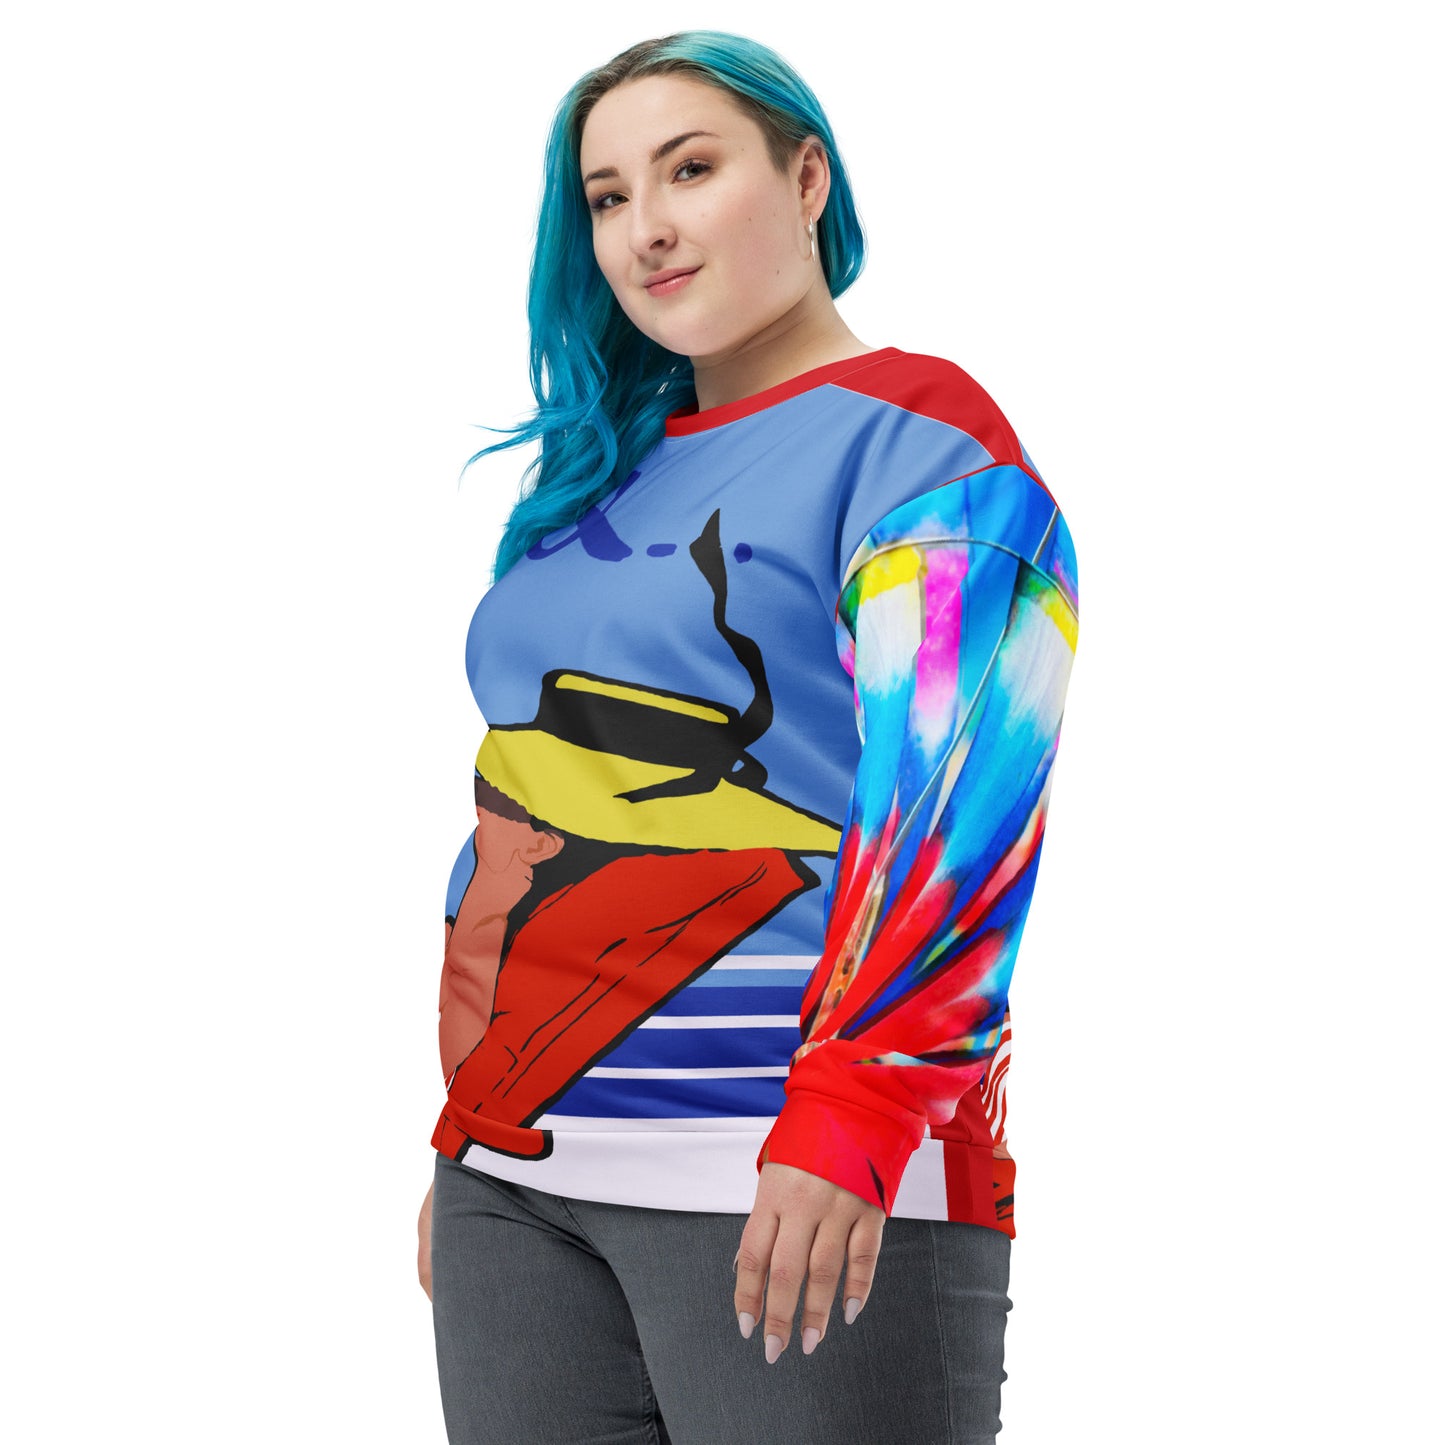 Relax Go To IT! Vacation-Themed Unisex Sweatshirt